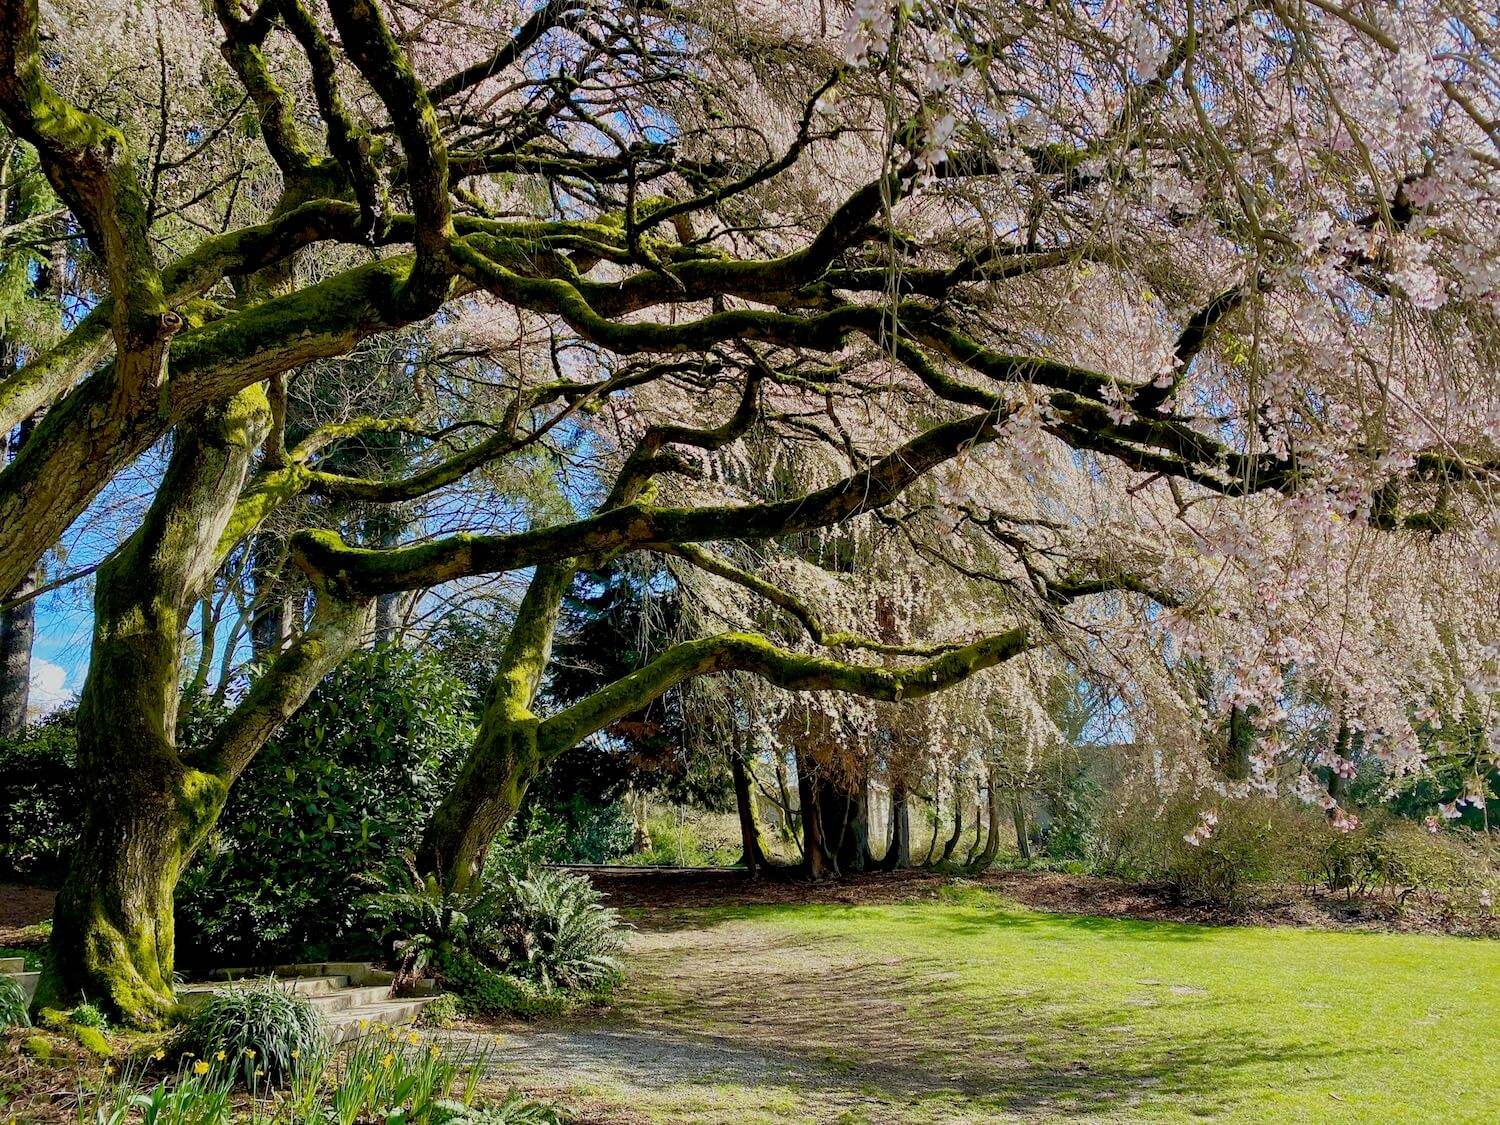 Scene in Volunteer Park in Seattle with the trunks of 100 year old trees just in time for their cherry blossoms to emerge in rains of pink cascading flowers. The lawn is green with a gravel path through it.